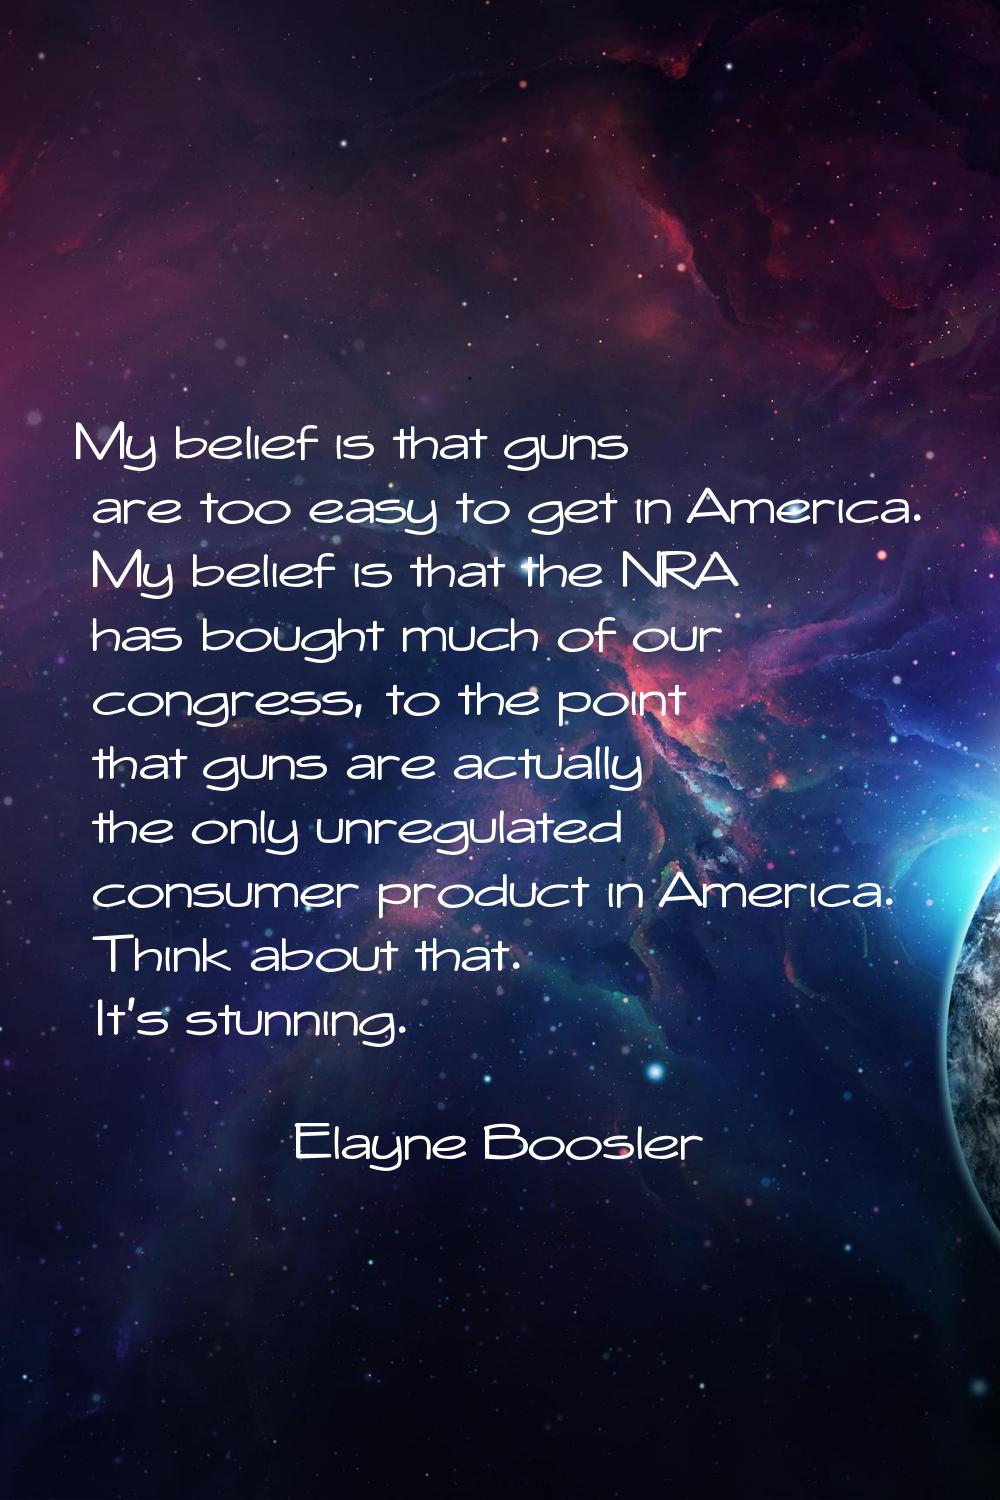 My belief is that guns are too easy to get in America. My belief is that the NRA has bought much of